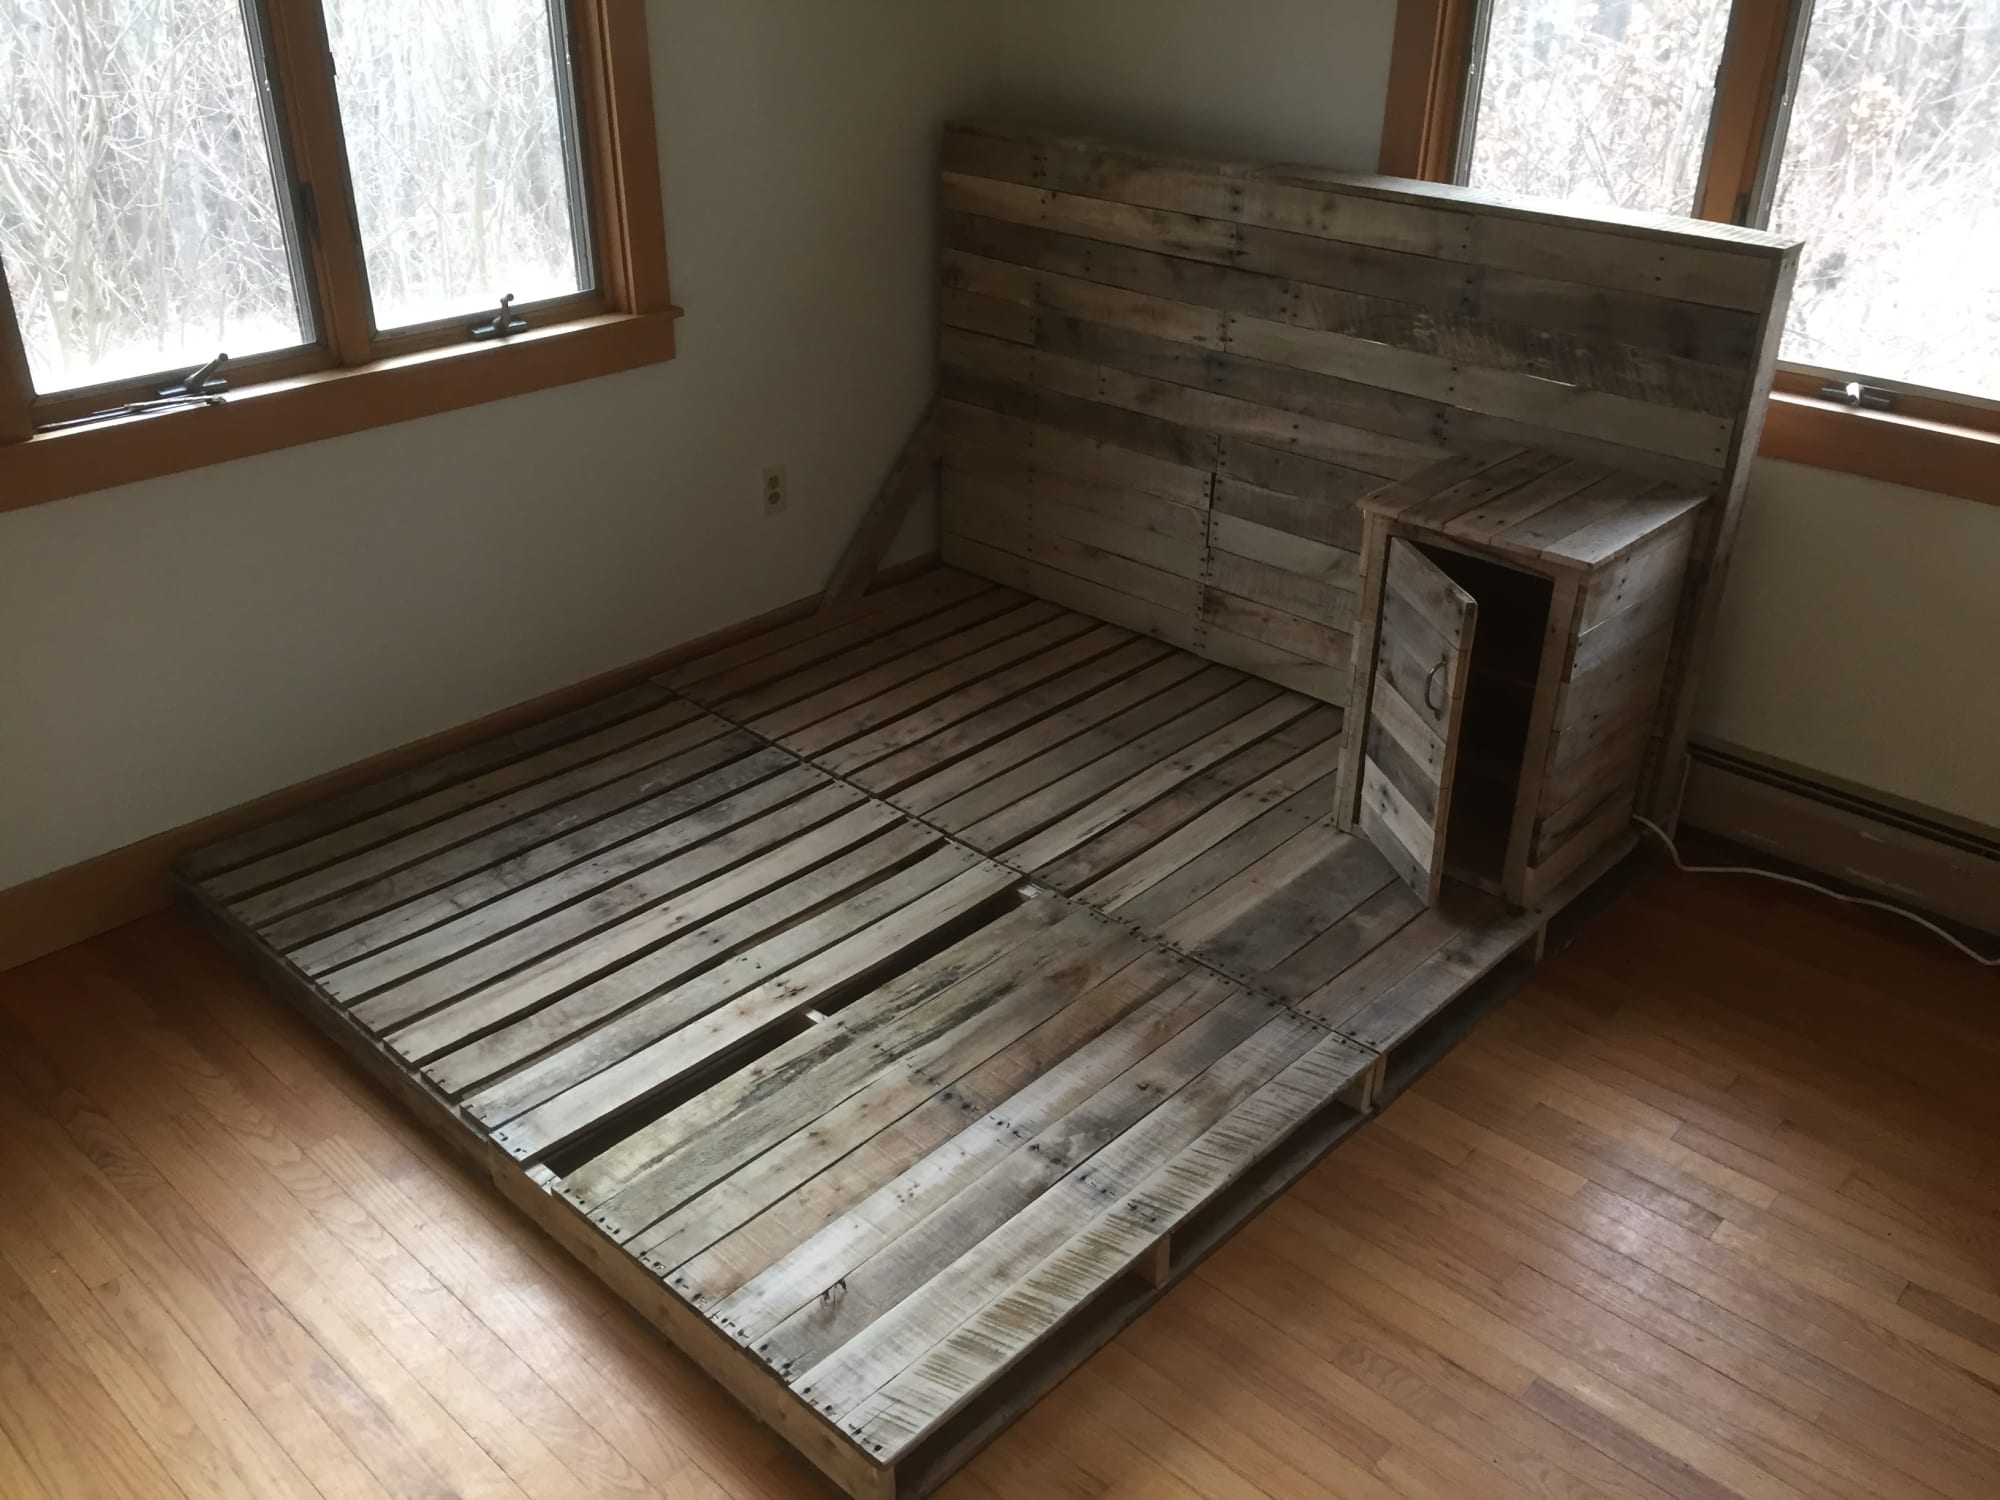 Pallet Bed Frame Queen By Handmades, How Many Pallets Do You Need For A Queen Size Bed Frame